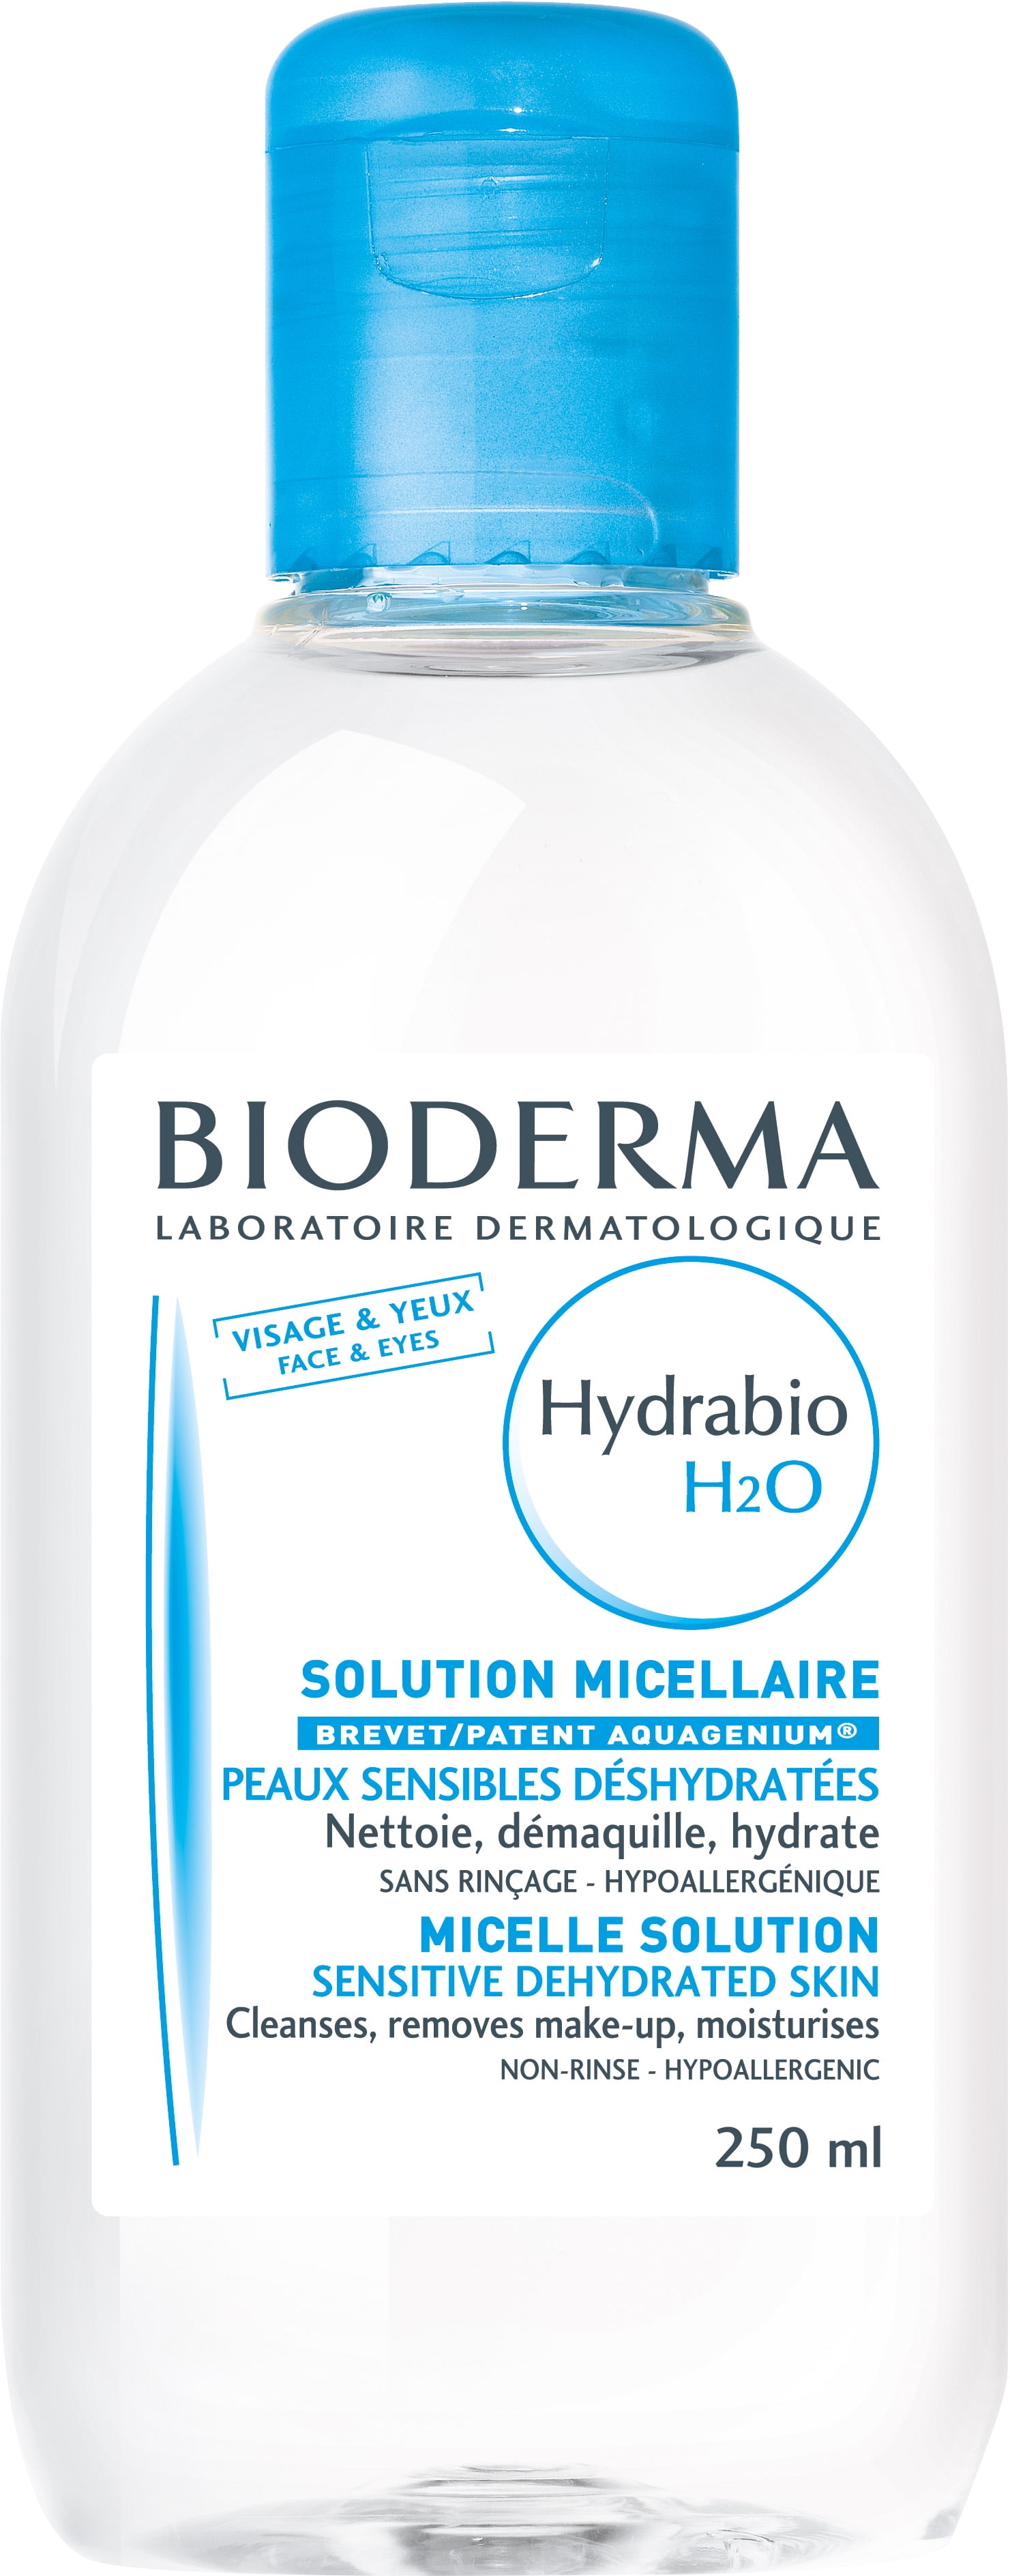 Bioderma Hydrabio H2O Hydrating Micellar Cleansing Water and Makeup Removing Solution for Dehydrated Sensitive Skin - Face and 8.33 fl.oz. - Walmart.com